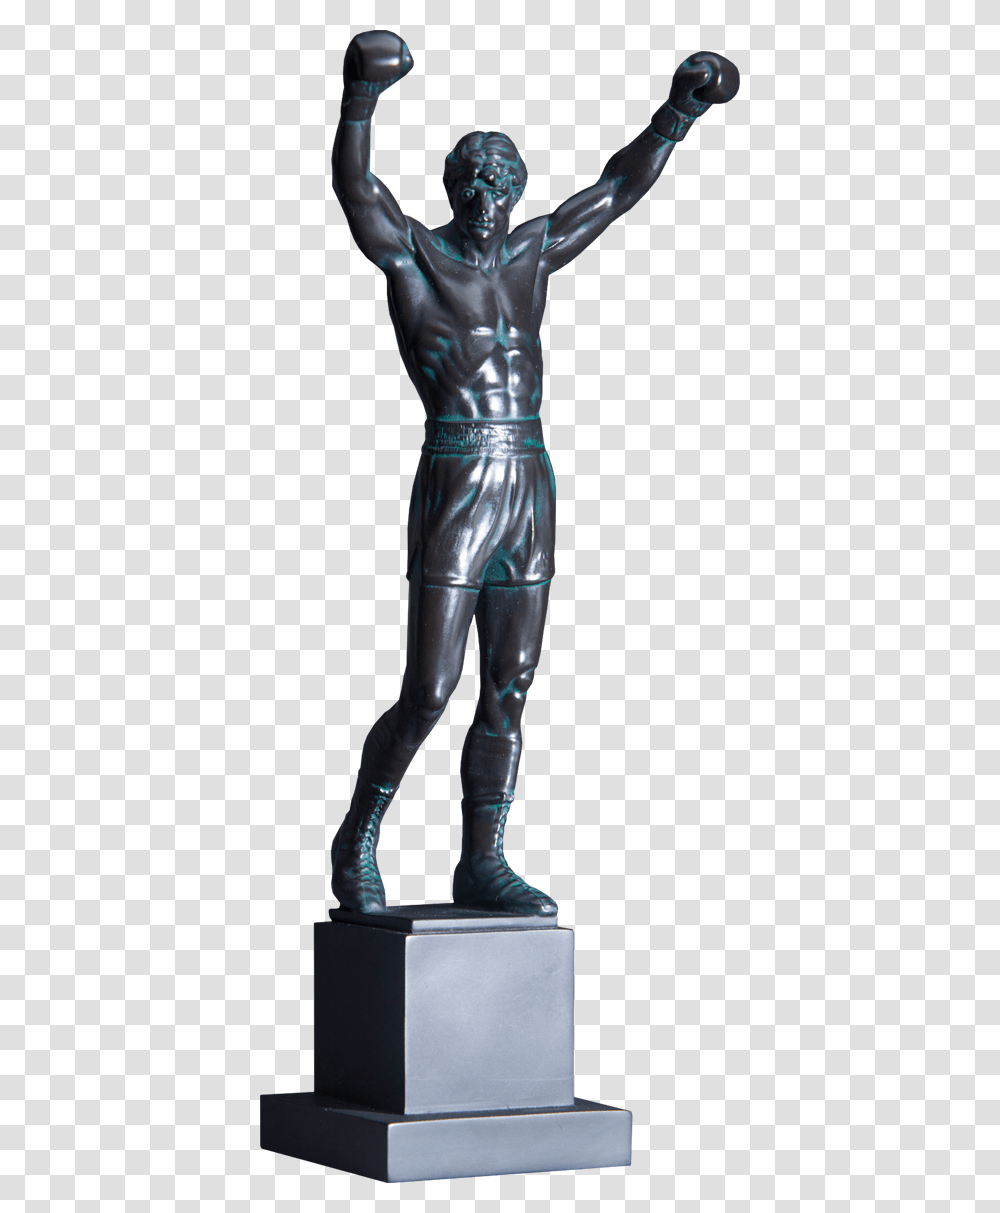 Rocky Balboa Statue Figure, Latex Clothing, Toy, Apparel, Spandex Transparent Png